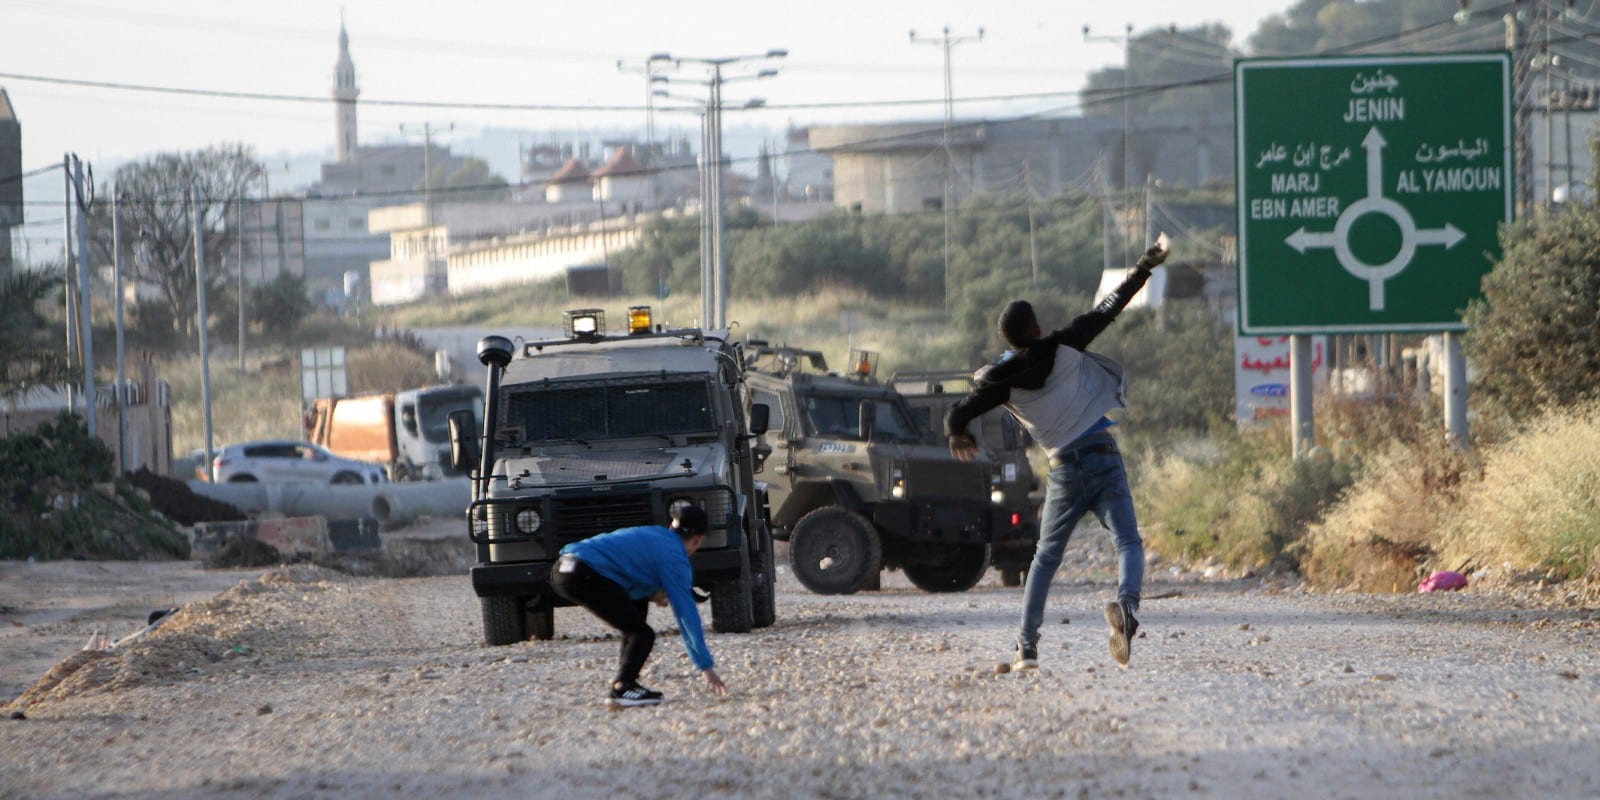 May 7, 2022, Jenin, West Bank, Palestine: Palestinians throw stones at the Israeli army